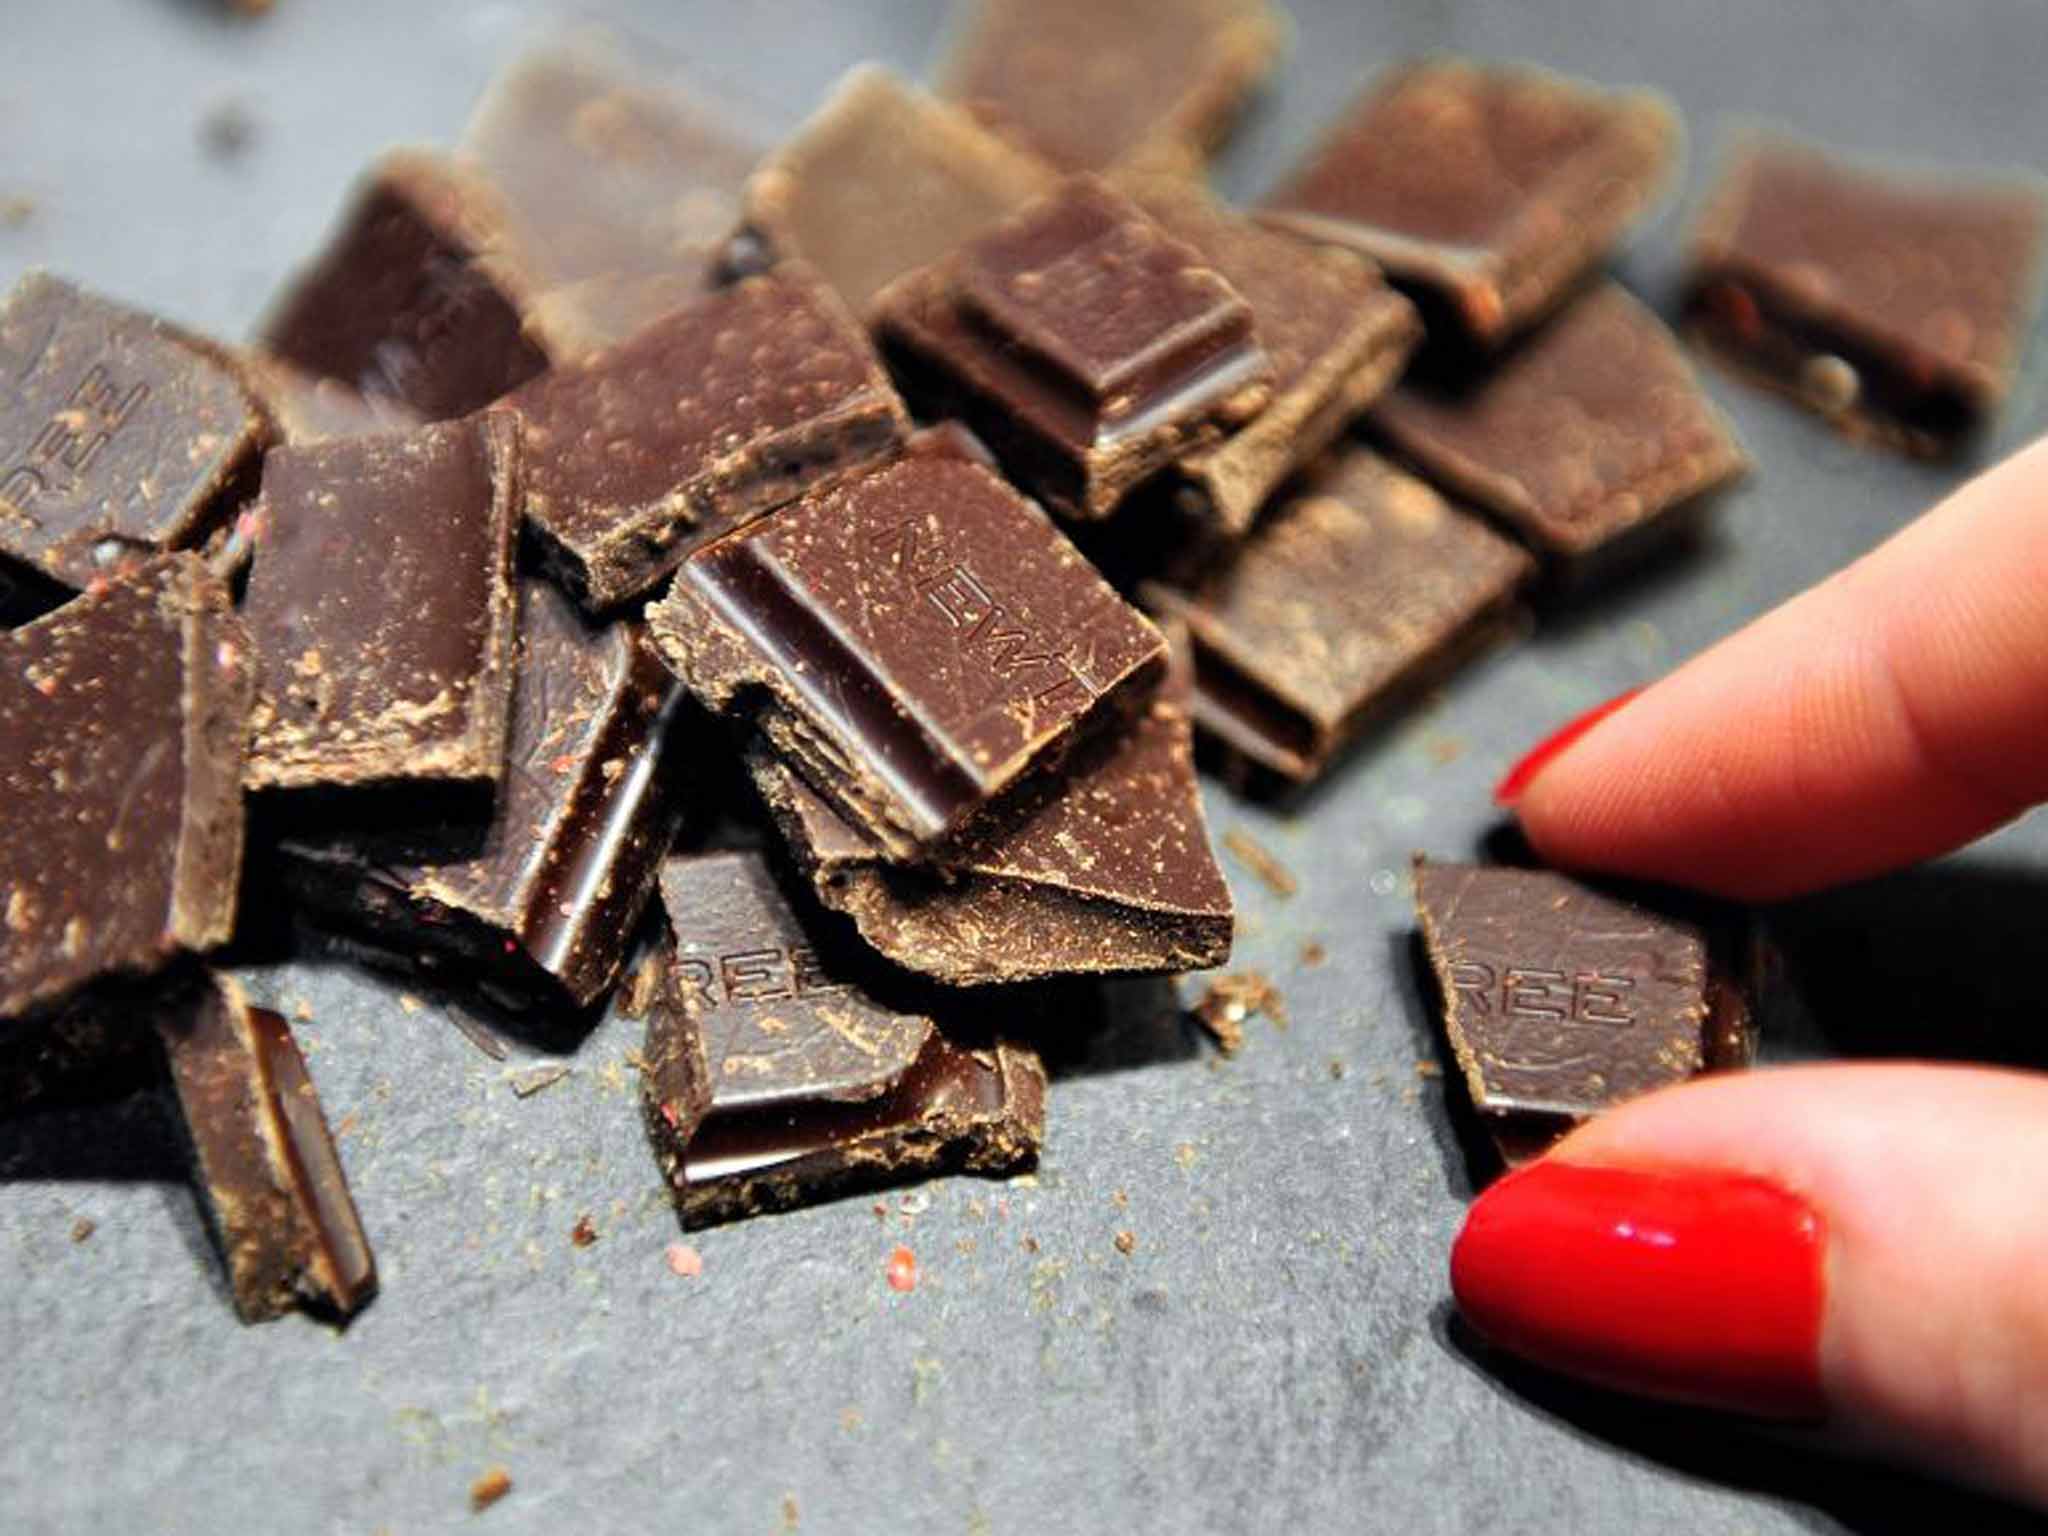 Chocs away: a nutrient in chocolate may increase blood flow to the brain